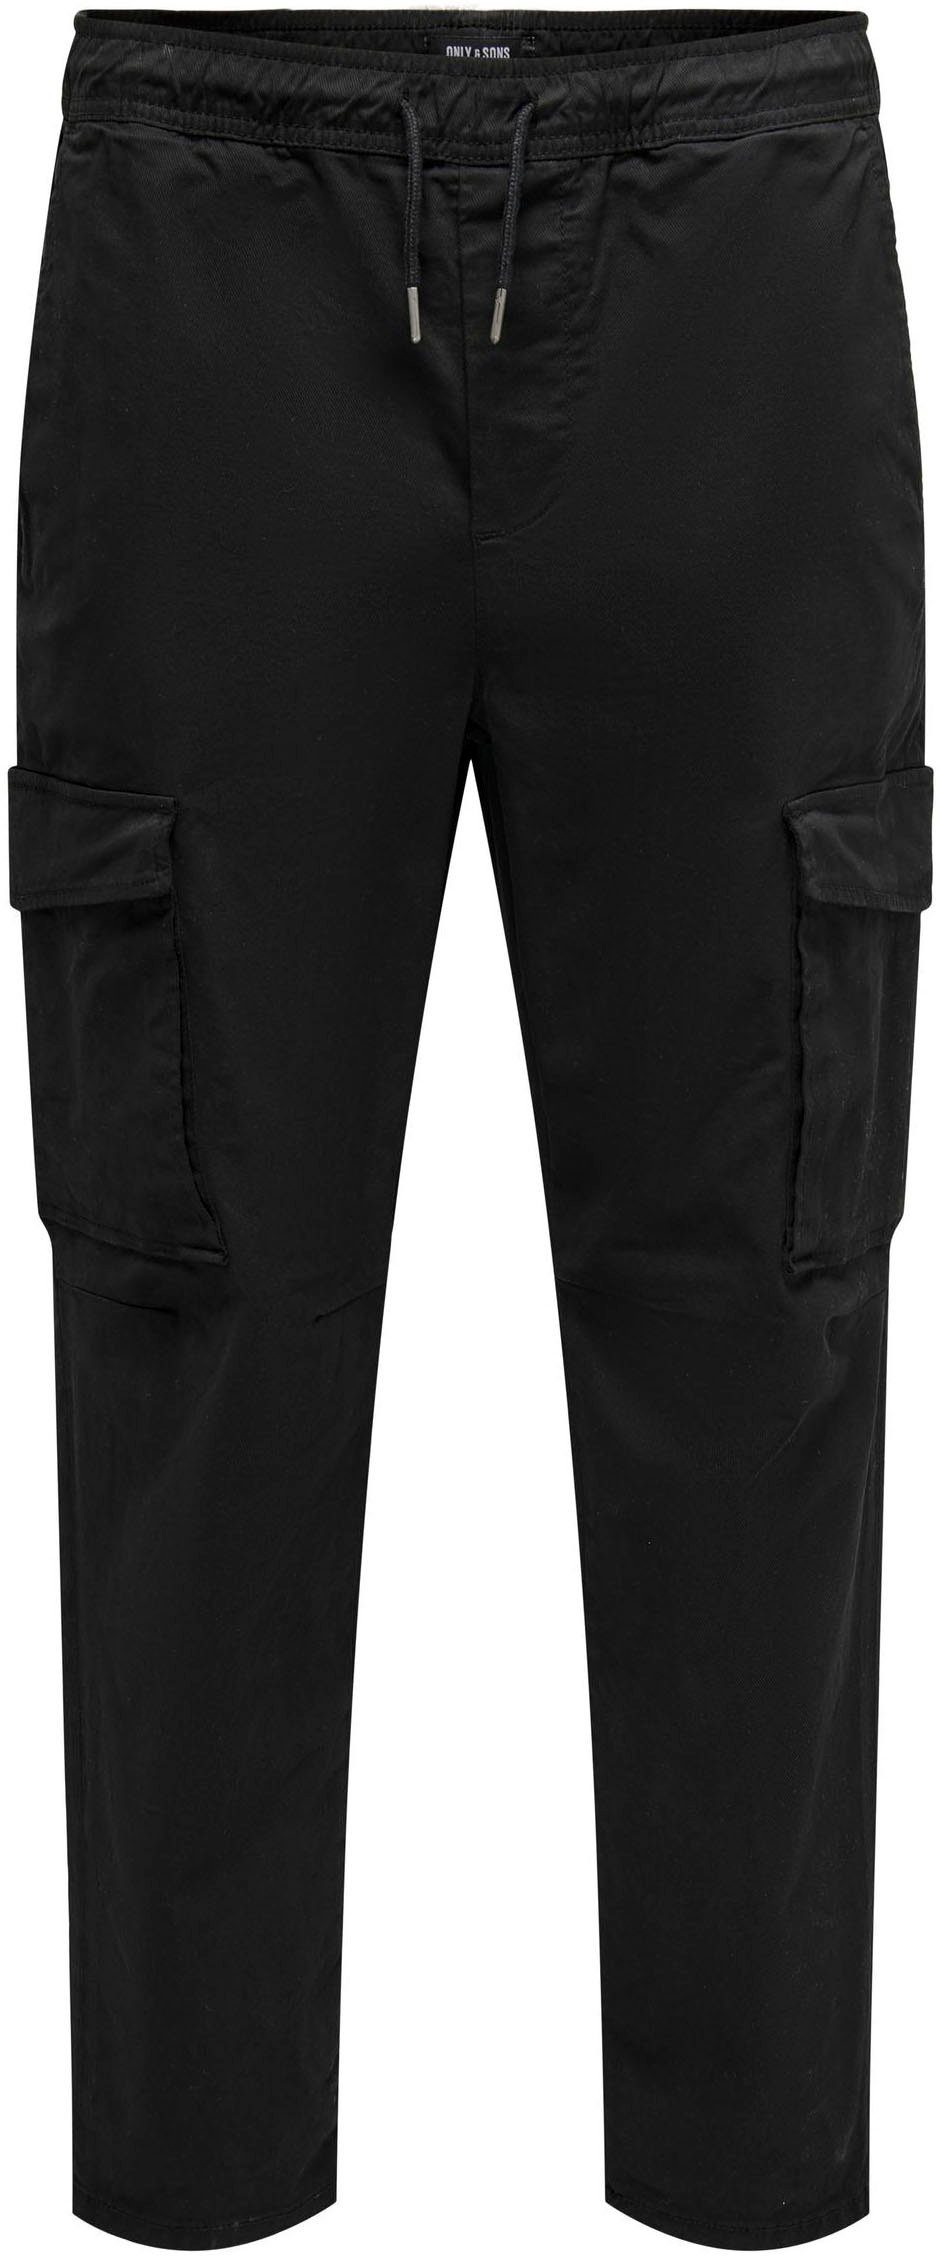 ONLY & SONS Cargohose ONSELL TAPERED CARGO schwarz 4485